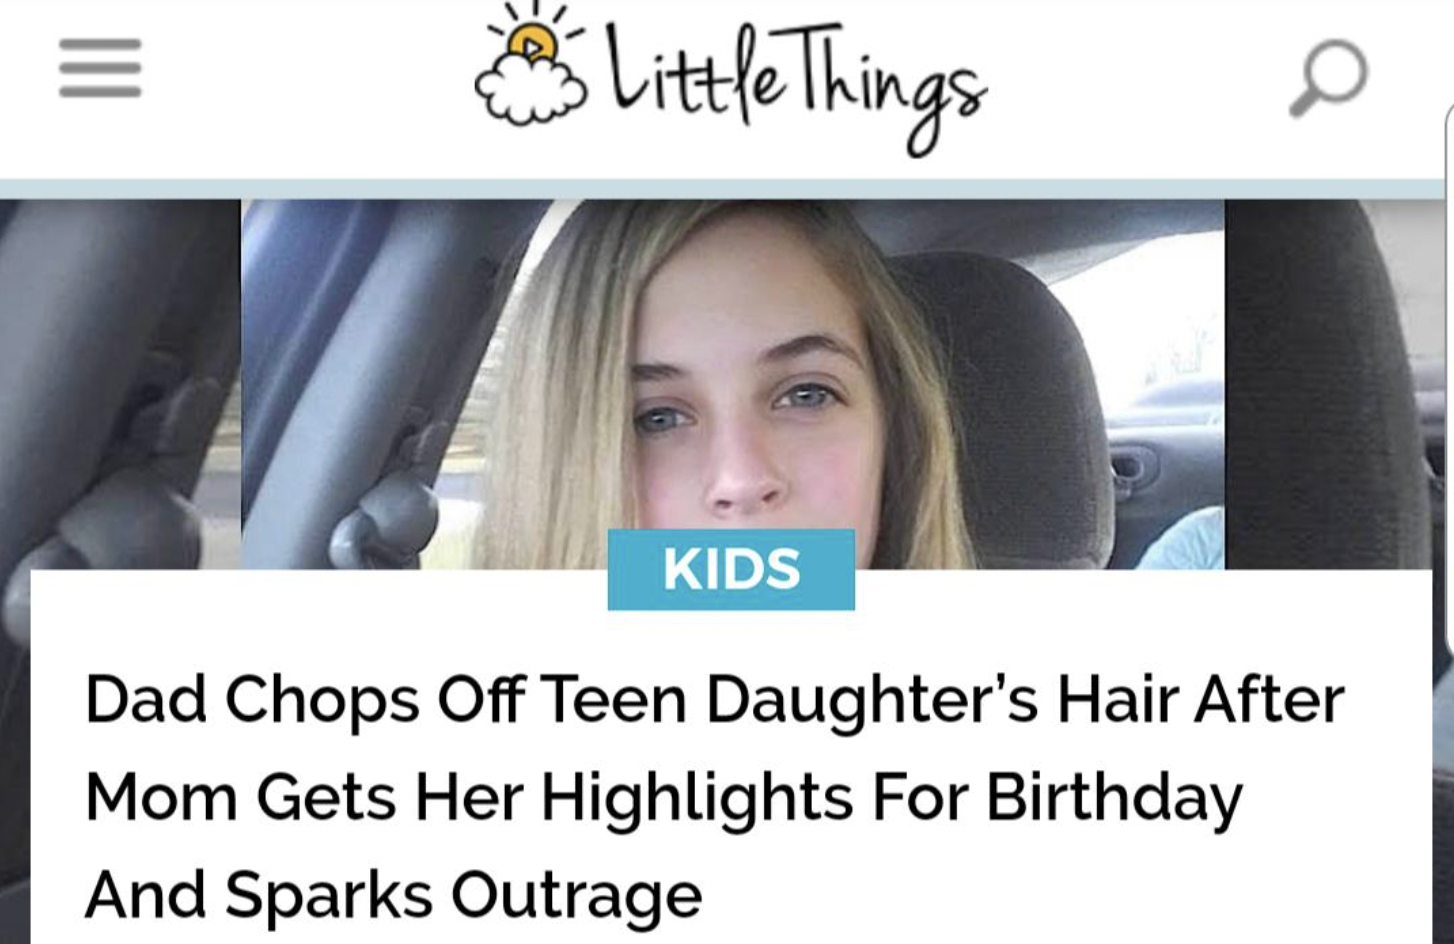 photo caption - ||| Little Things 0 Kids Dad Chops Off Teen Daughter's Hair After Mom Gets Her Highlights For Birthday And Sparks Outrage